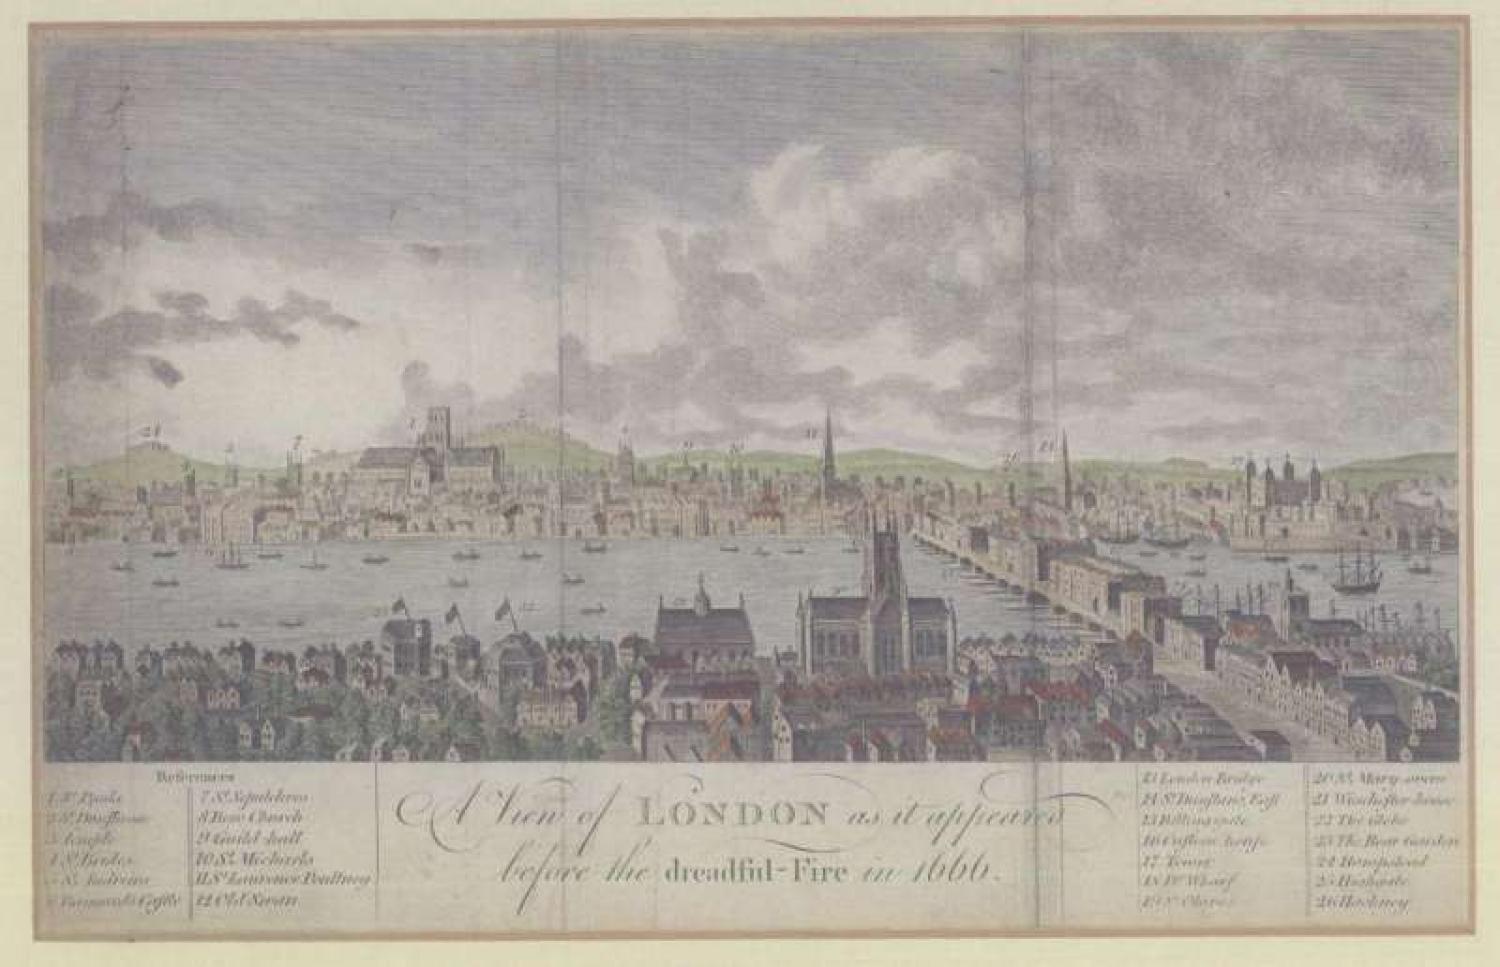 A View of London as it appeared before the dr